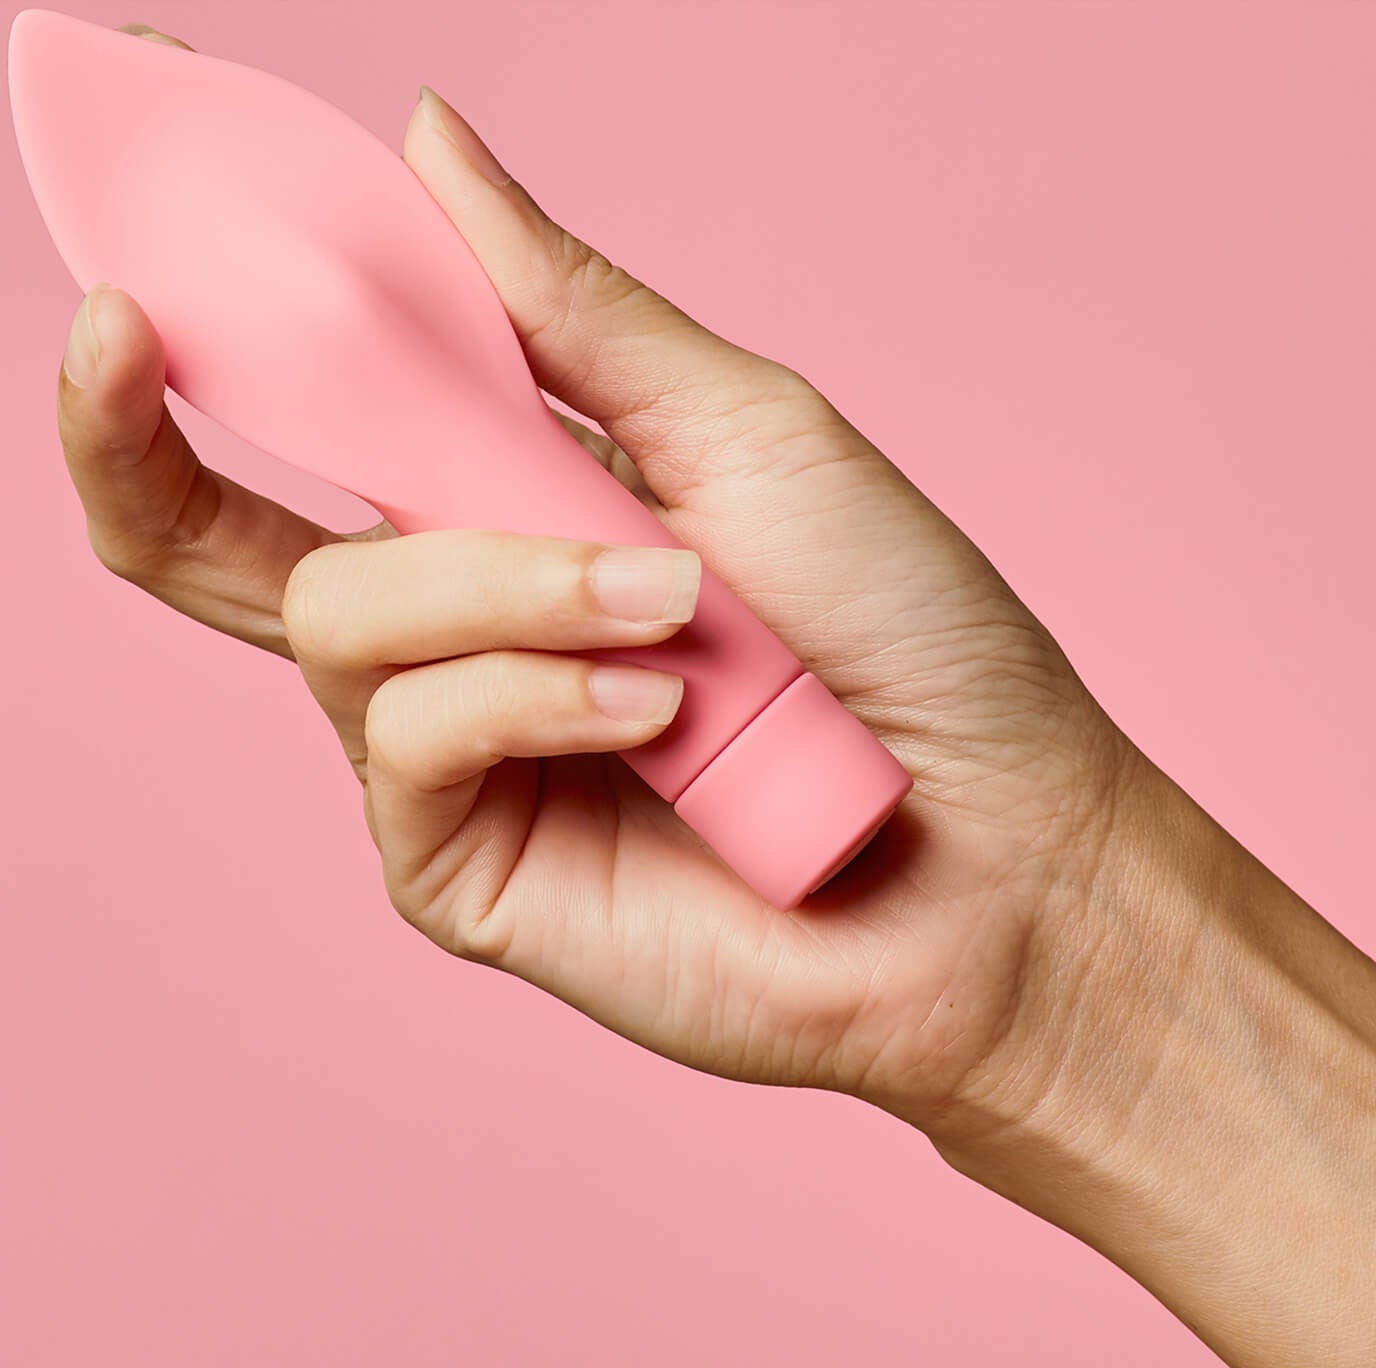 37 Sex Toys That'll Make You Sing, "Boom, Boom, Boom, Boom, I Want You In My Room"